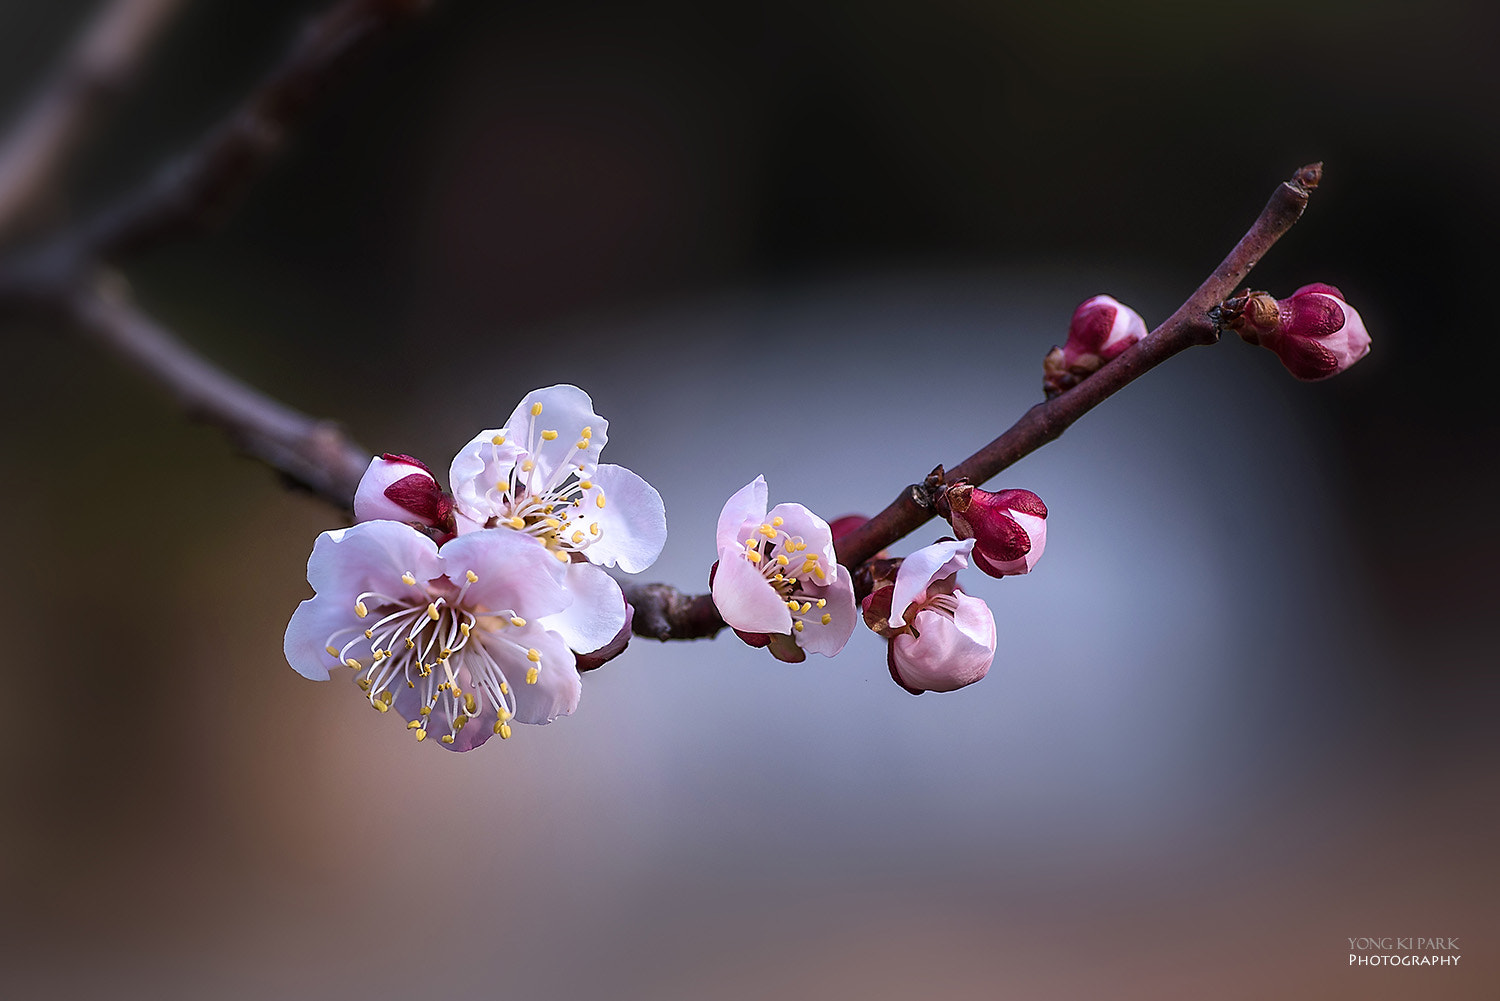 Pentax K-1 sample photo. Opening of the spring-9 photography